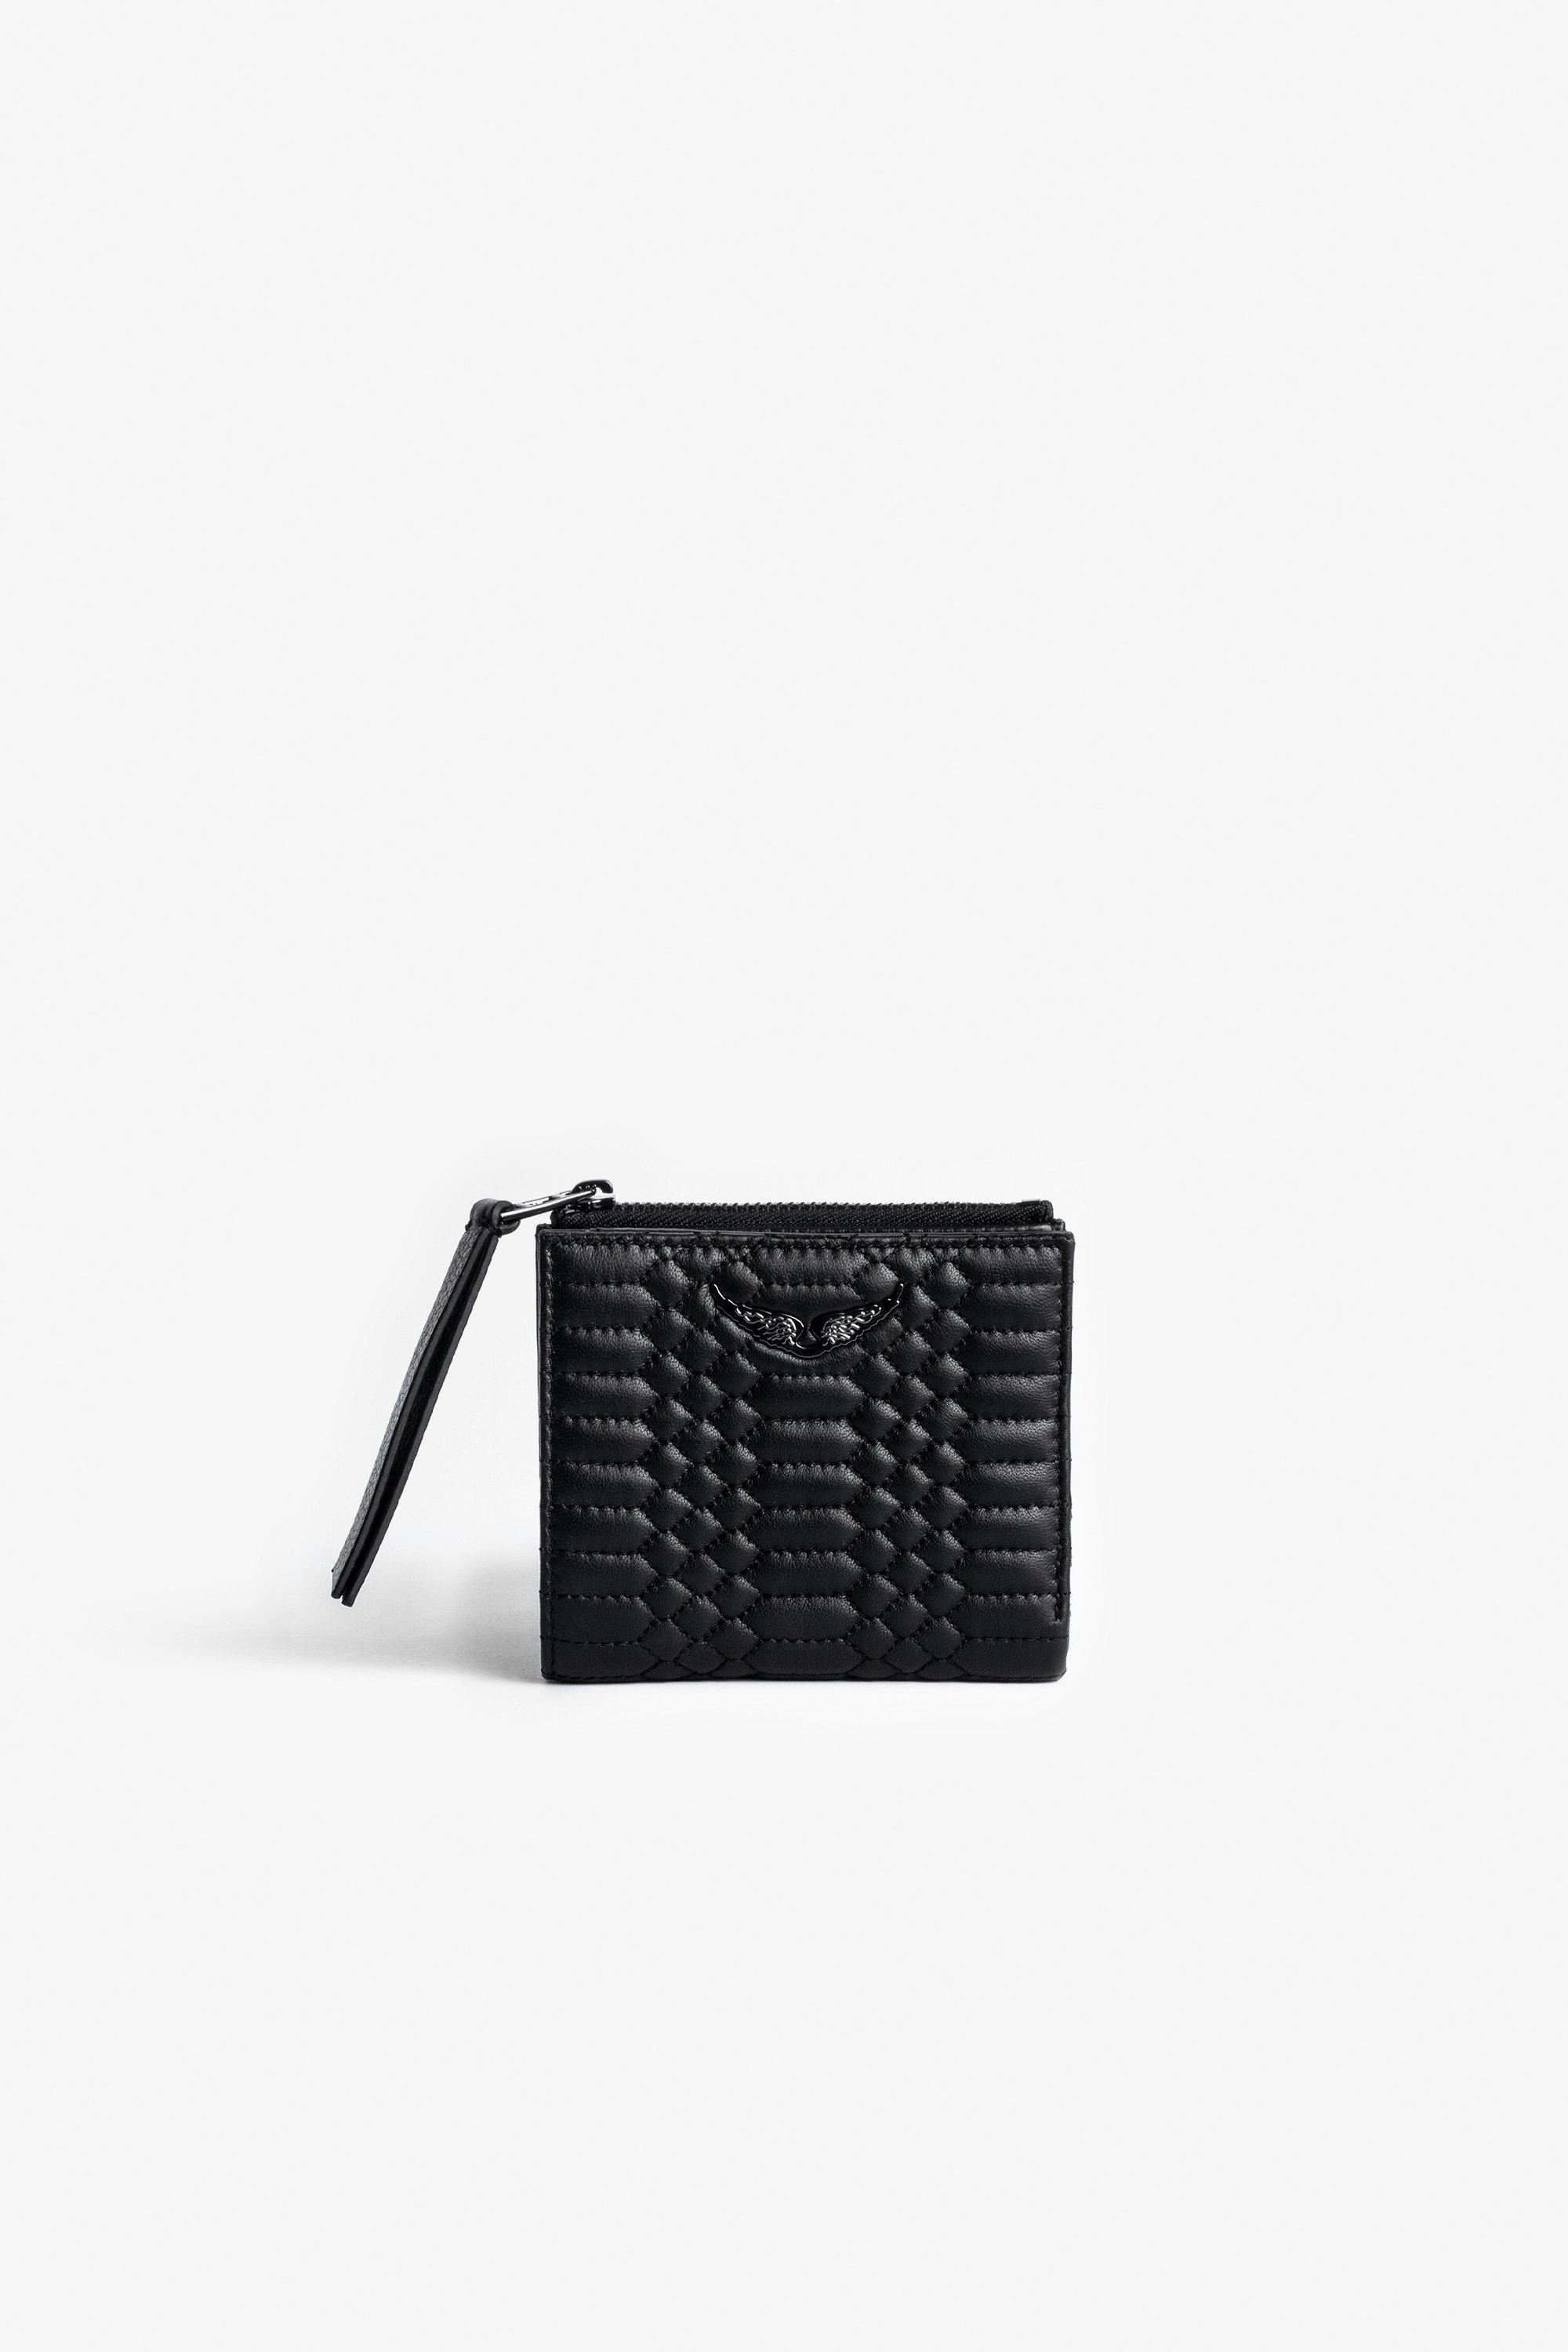 ZV Fold Purse Quilted lambskin leather purse in black